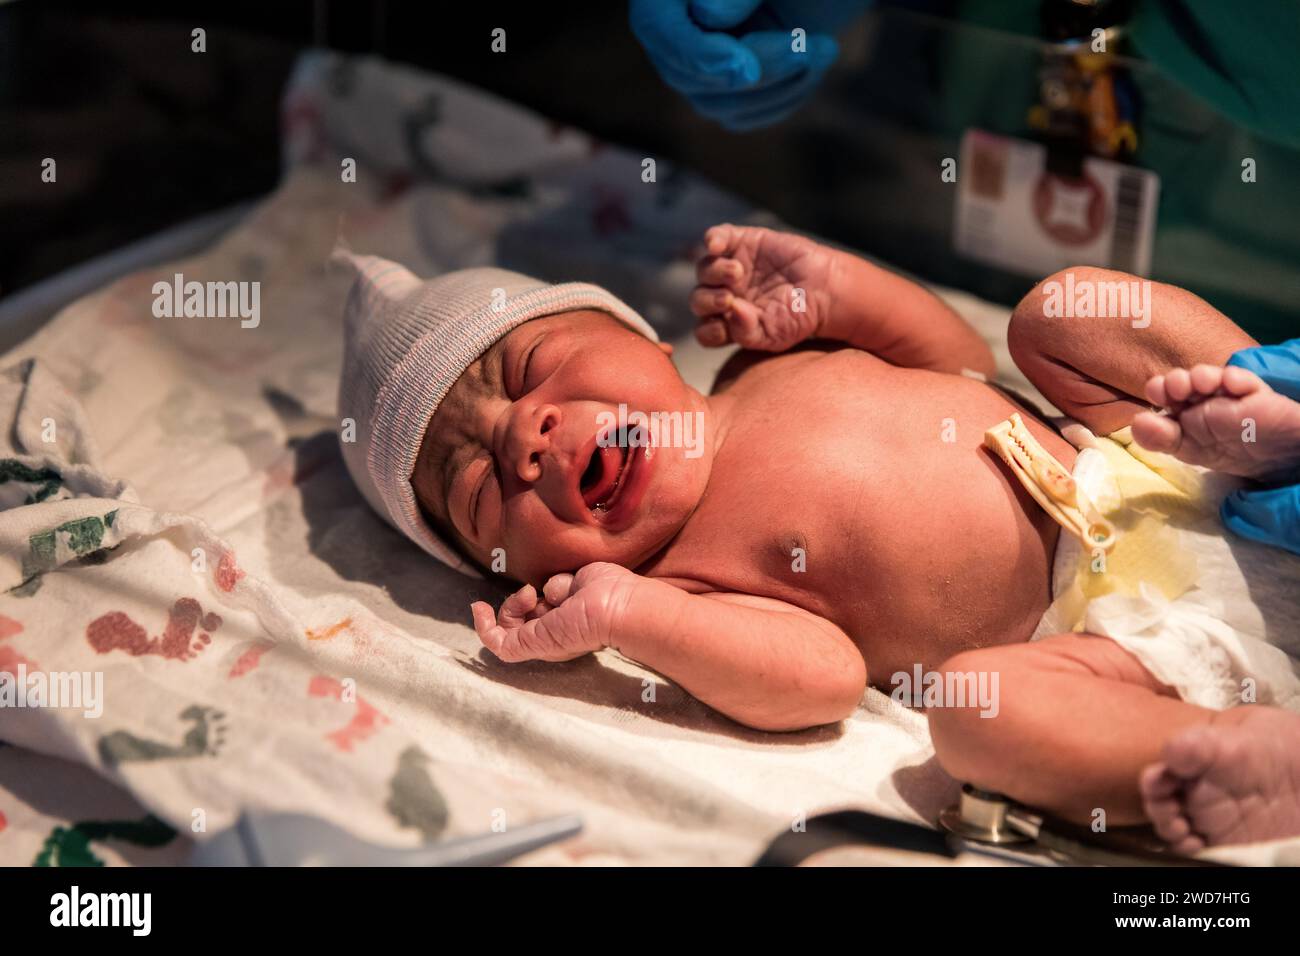 Multiracial baby cries while being weighed at nurse's station Stock Photo